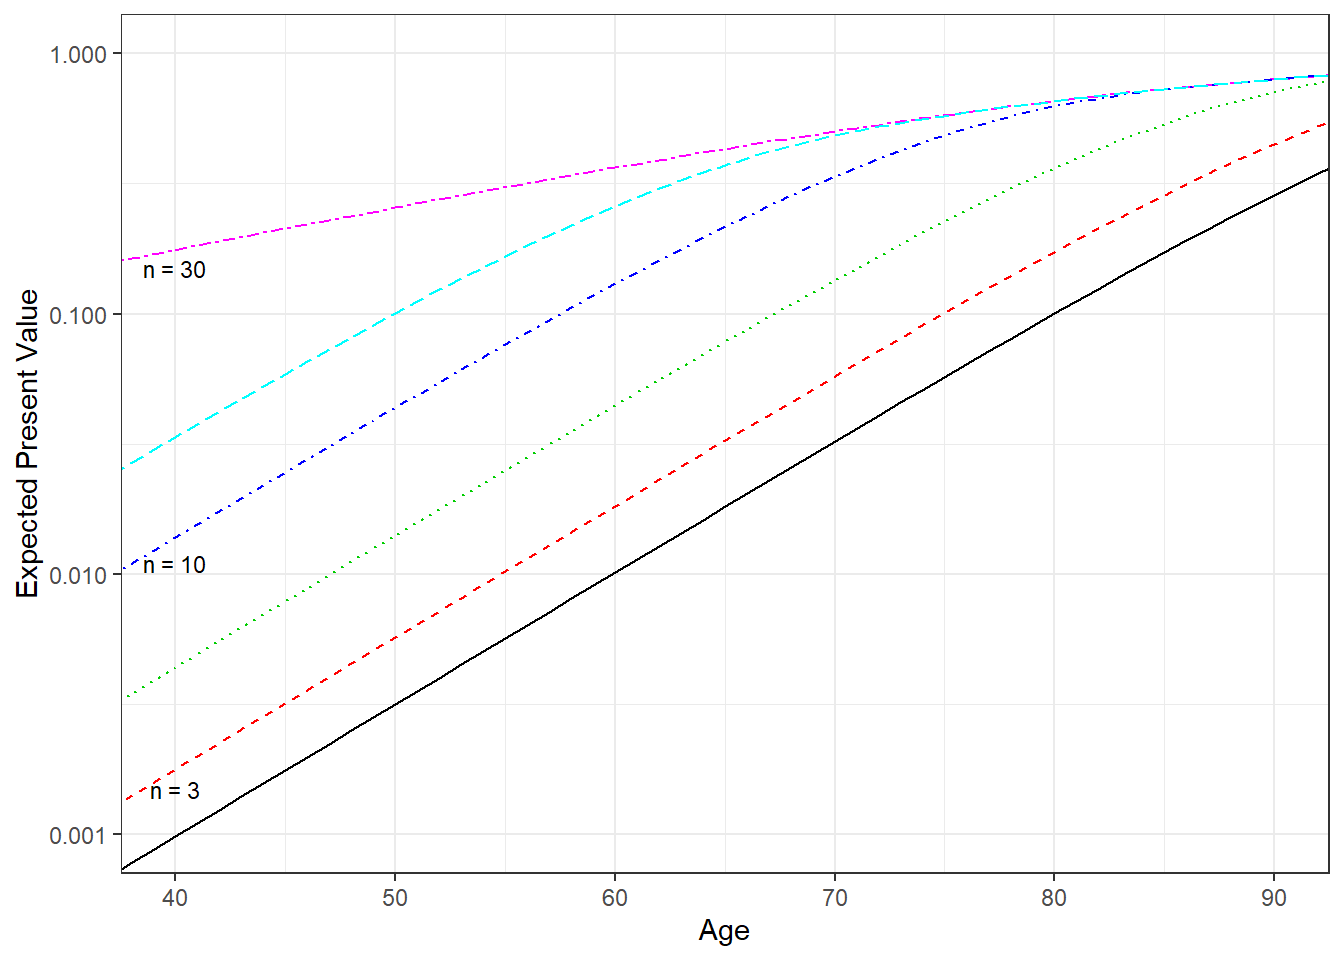 Term Life Insurance by Age and Term. A plot of expected presented values \(A_{{\bf{x}}:\enclose{actuarial}{n}} ^ {1}\) by age \(x\) for selected values of the term \(n\).